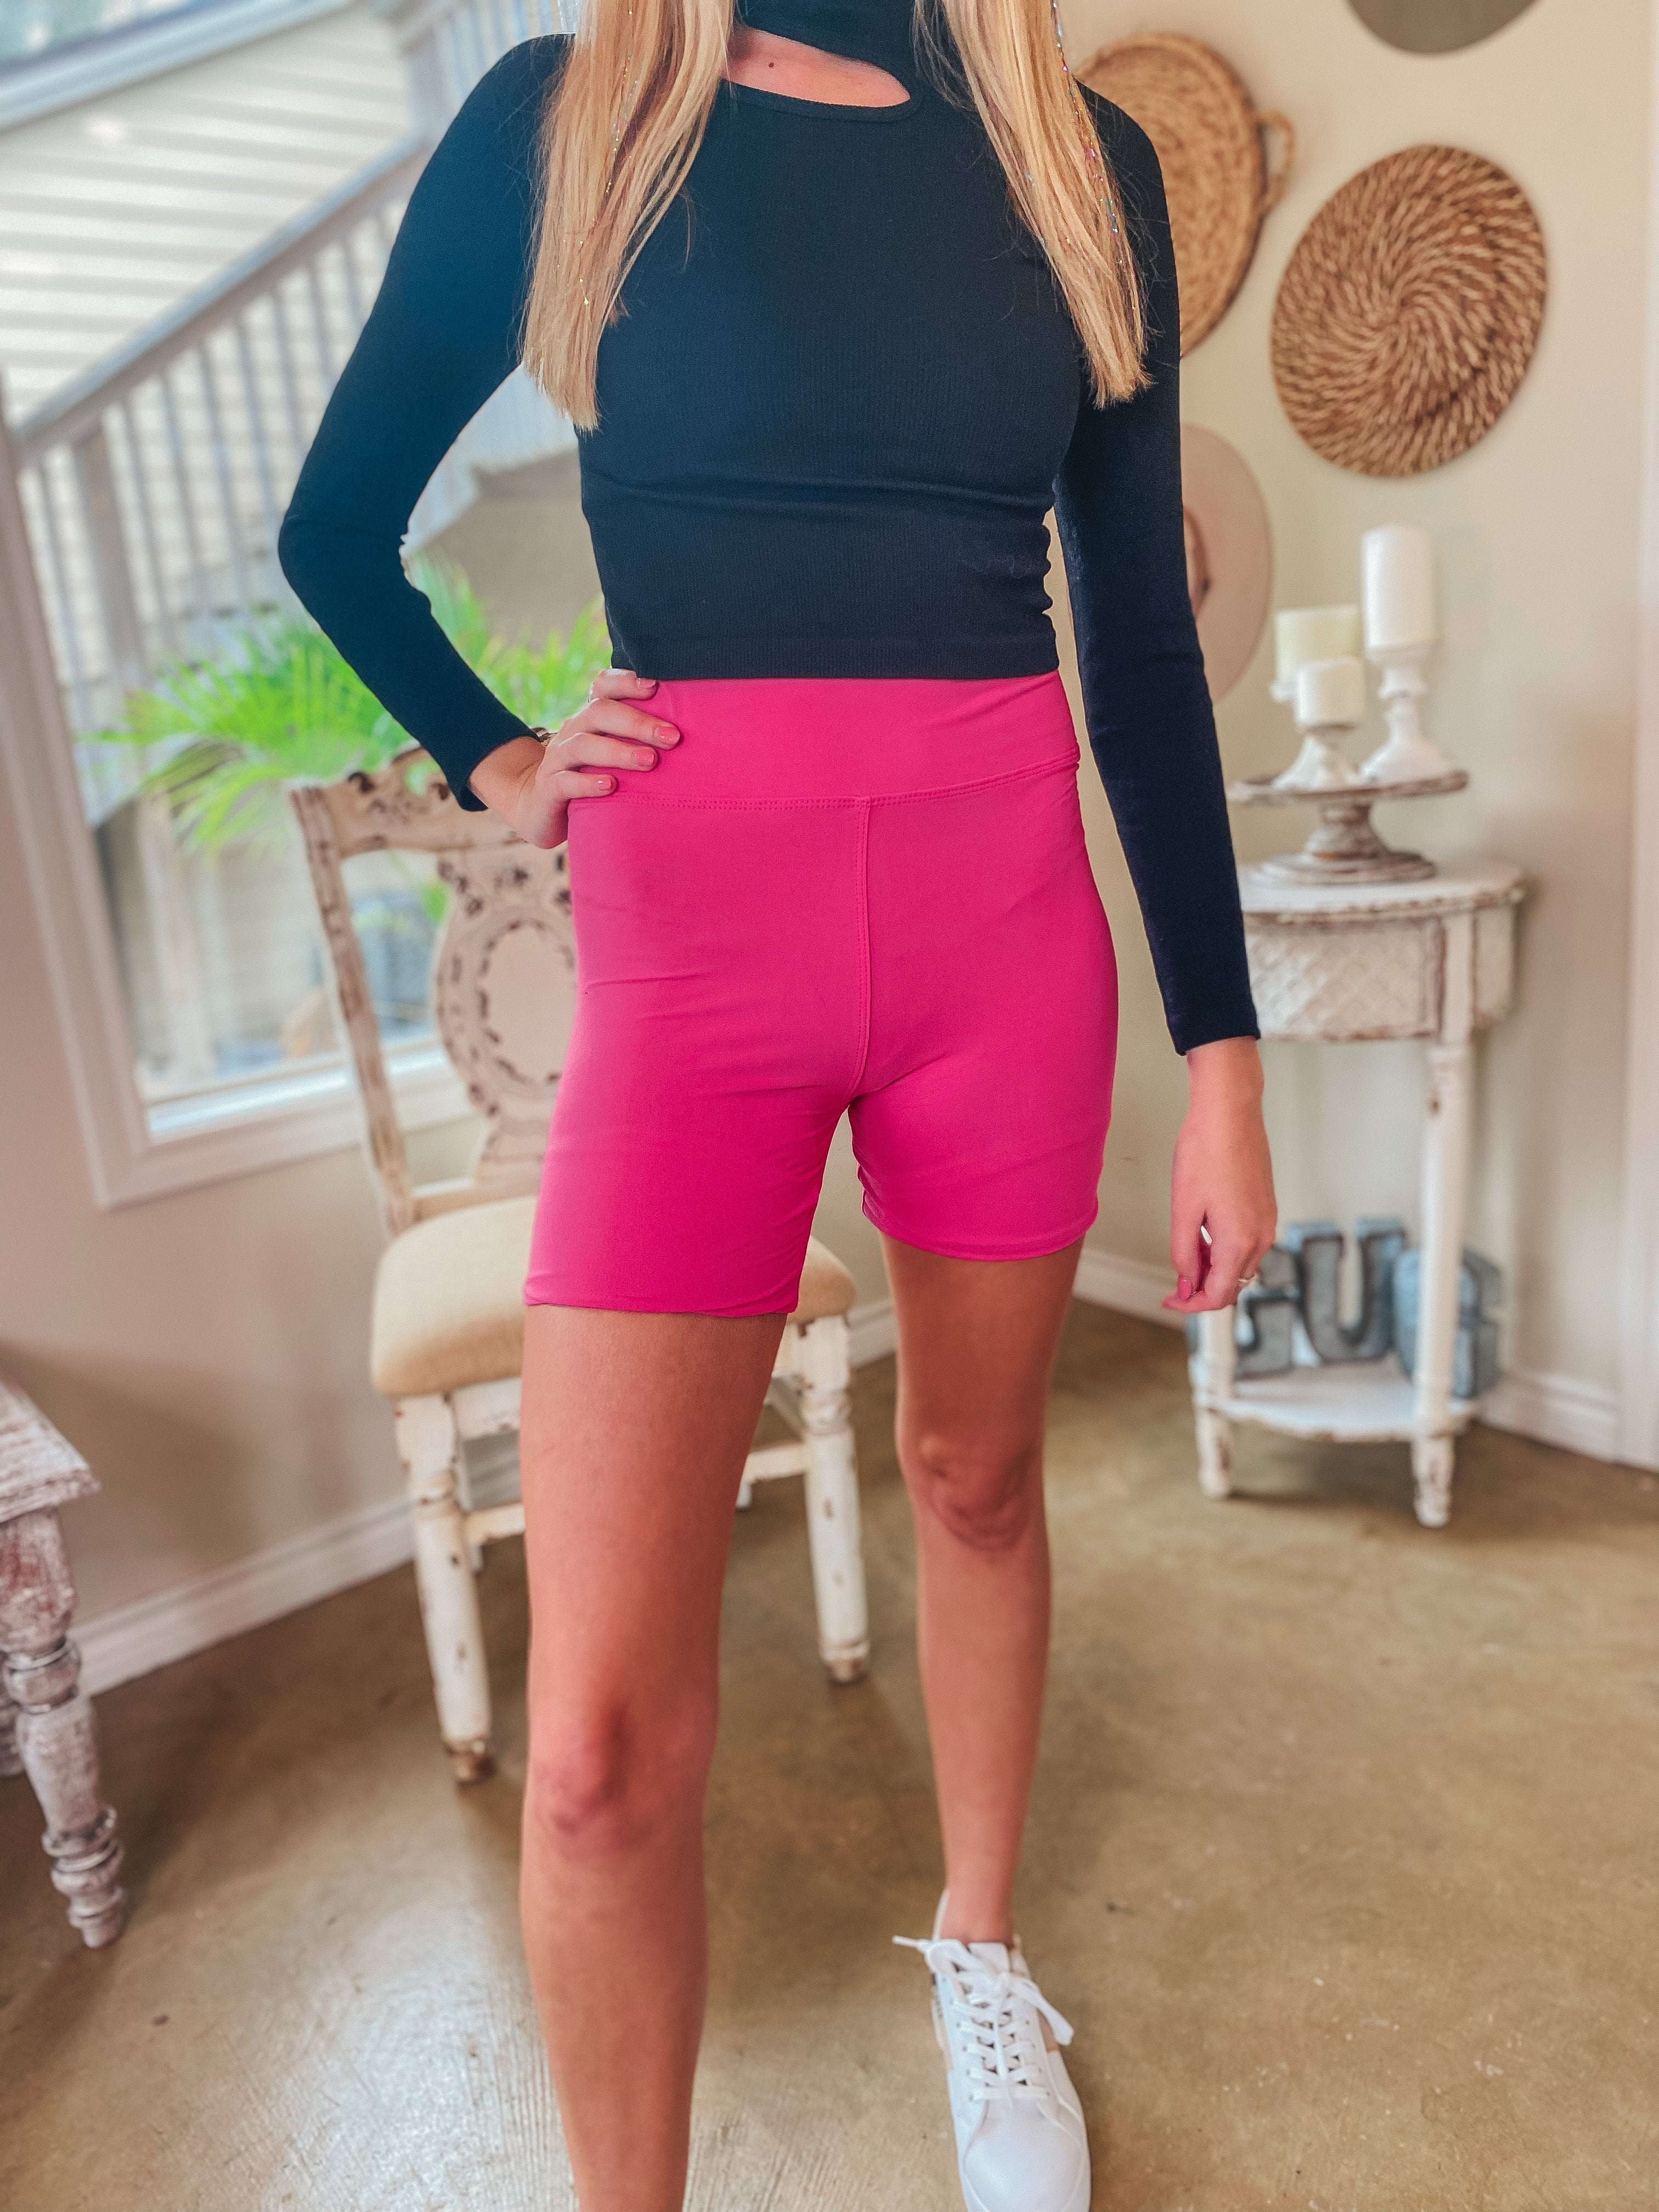 Finish Strong High Waist Biker Shorts in Pink - Giddy Up Glamour Boutique